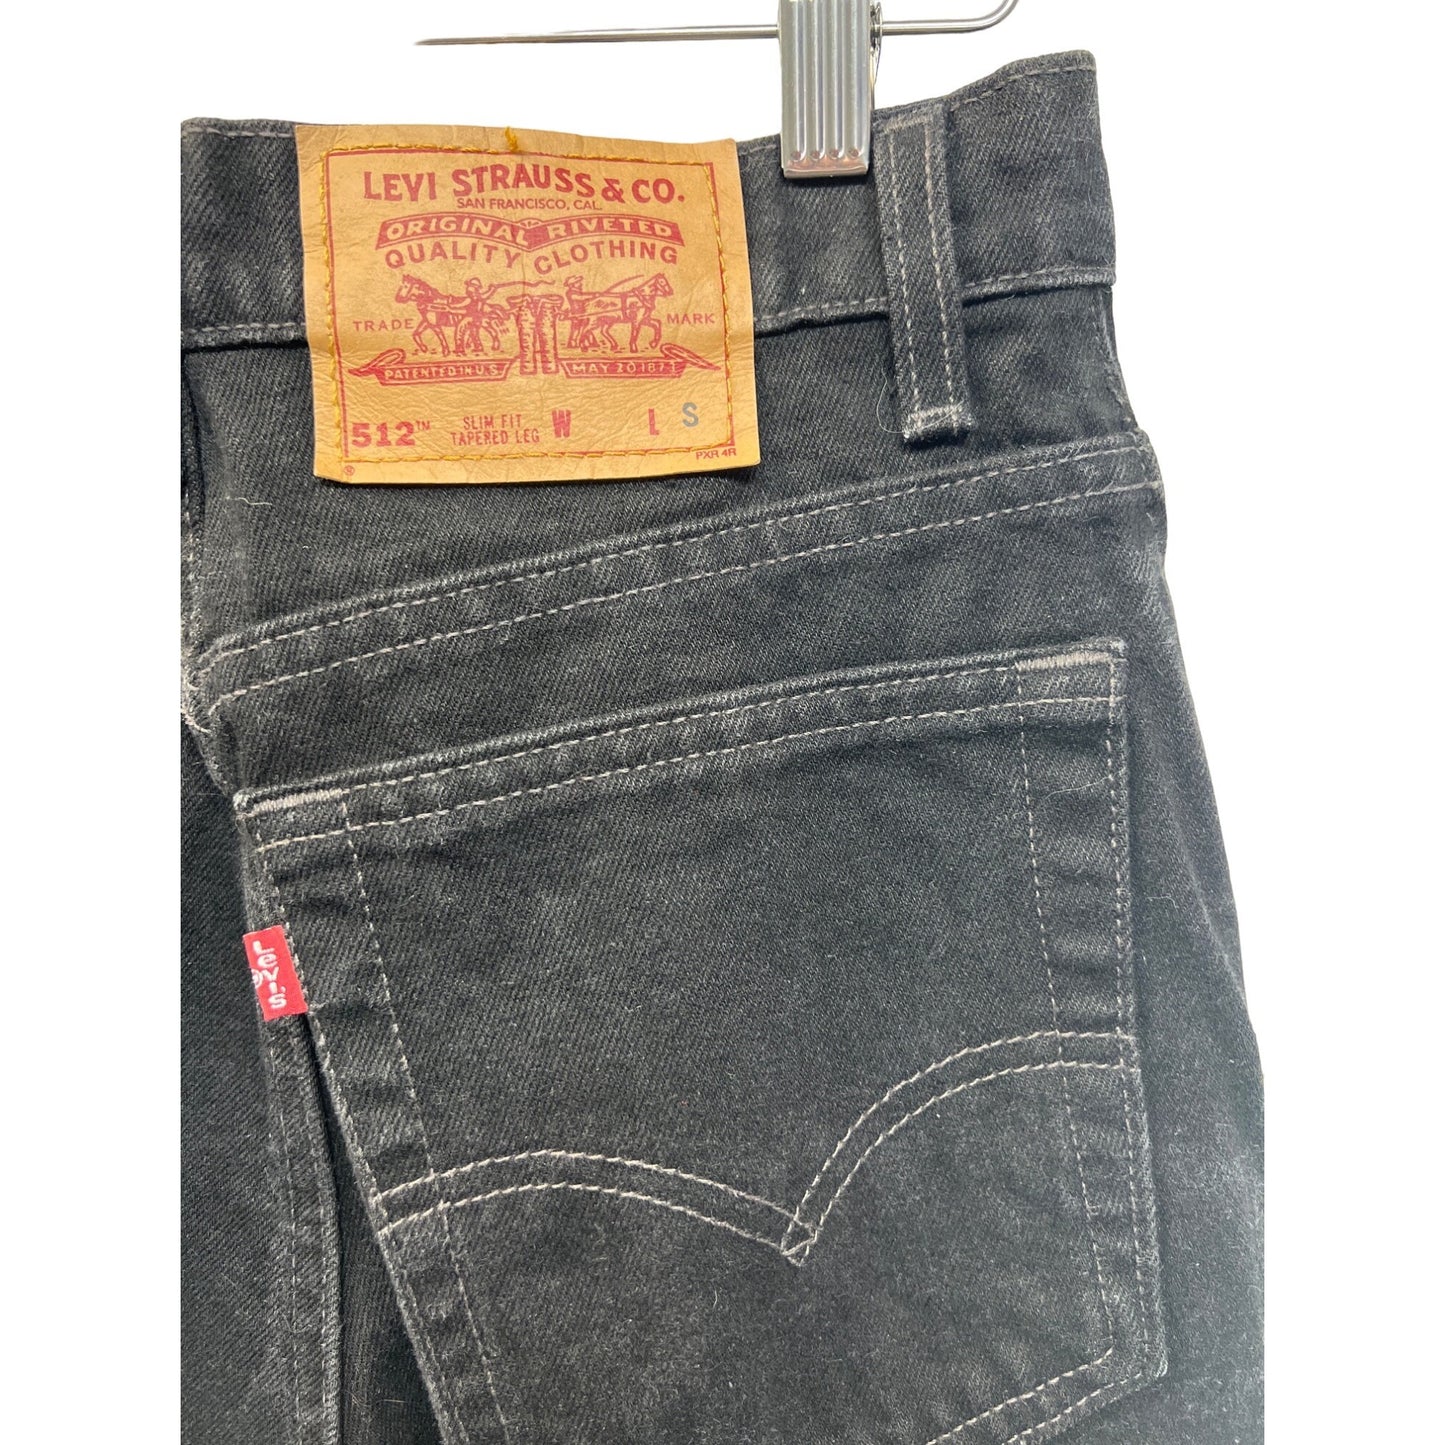 Levi's Vintage 90's Made in USA 512 Black Jeans